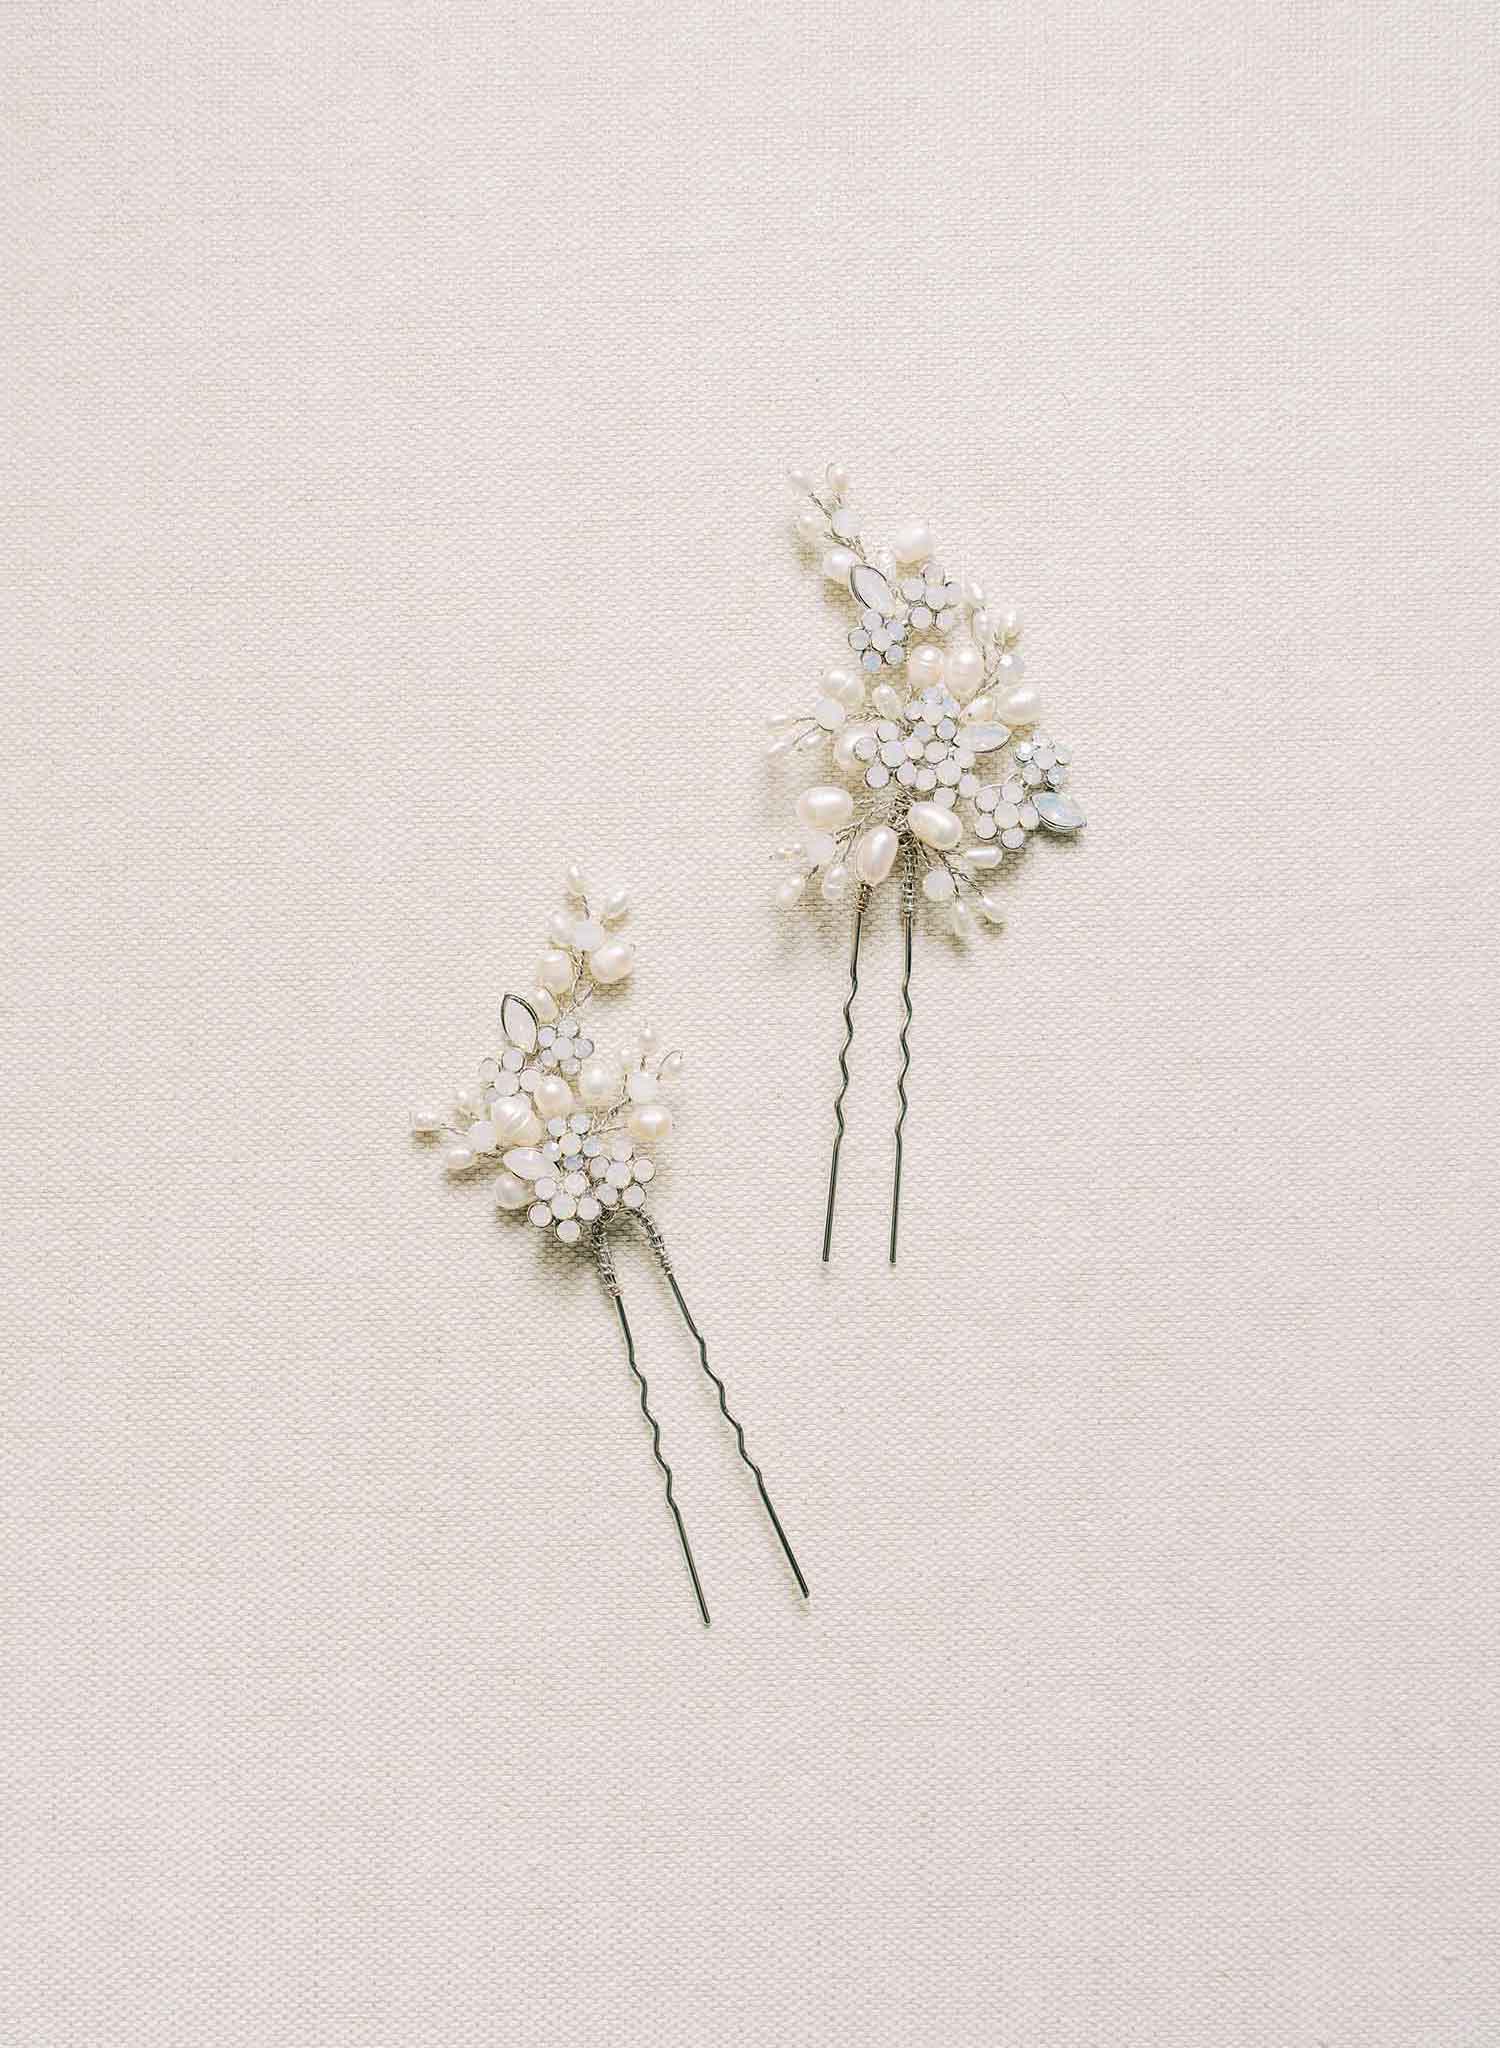 Dried Babies Breath Hair Pins with Pearls - Be Something New